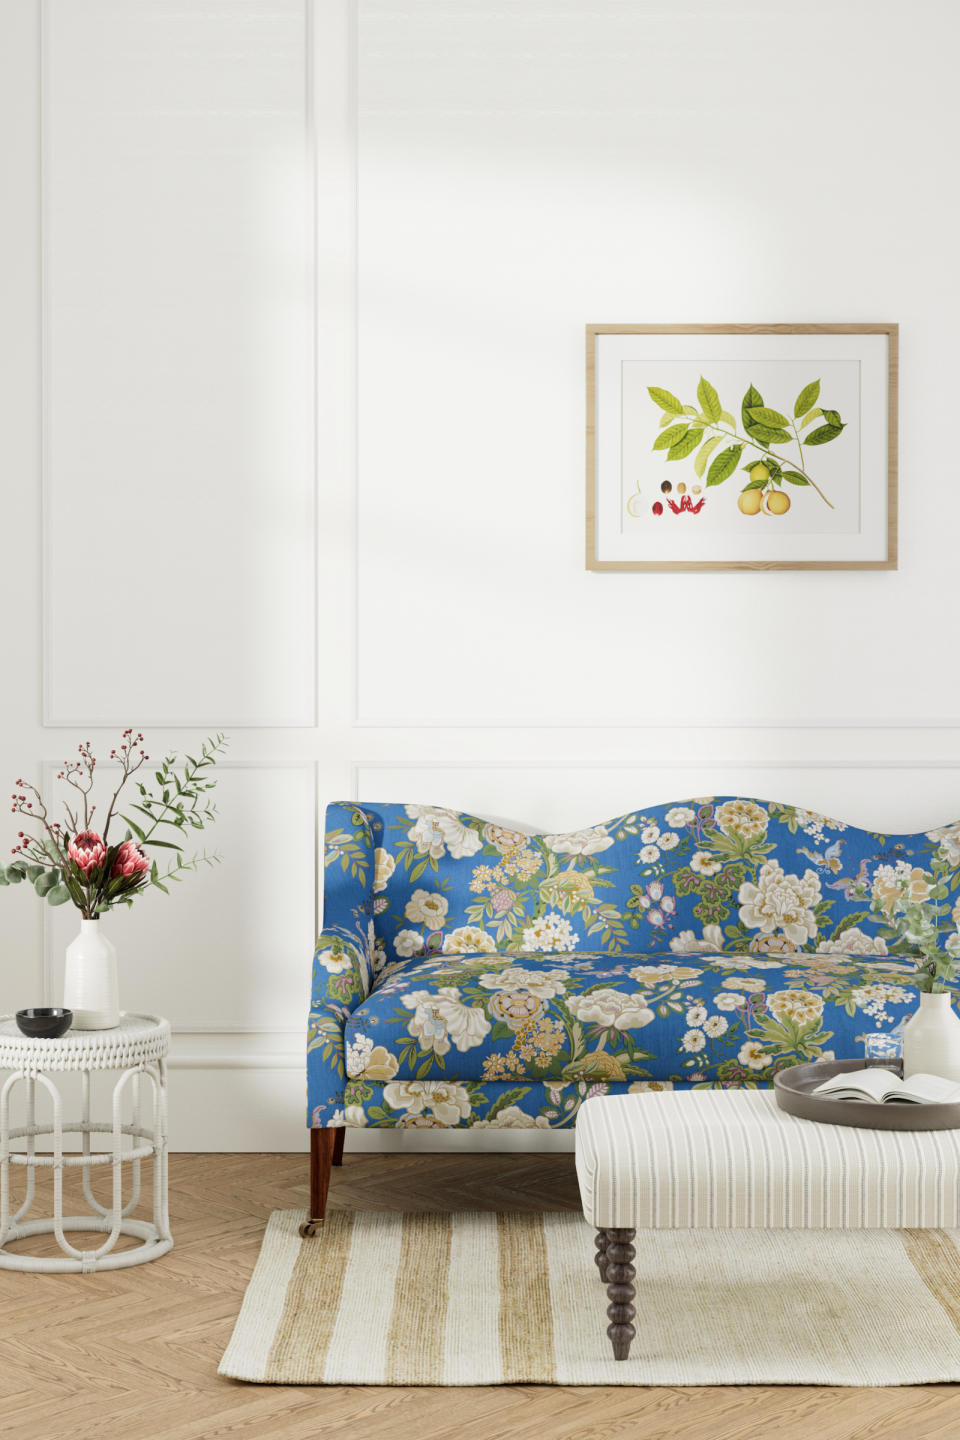 <p> If all-over chintz and the cottagecore aesthetic is too full-on for your taste, but you don&apos;t want to forgo florals altogether, consider brining in single piece that will provide the botanical fix. </p> <p> In this simple space, with white walls and a wooden floor, the sofa really stands out. It&apos;s upholstered in a fabric from the new Water Garden Collection at Sanderson. Complemented with a botanical print above and a bouquet of fresh blooms at the side, it&apos;s a masterclass in making a subtle statement with your country decorating ideas.&#xA0; </p>